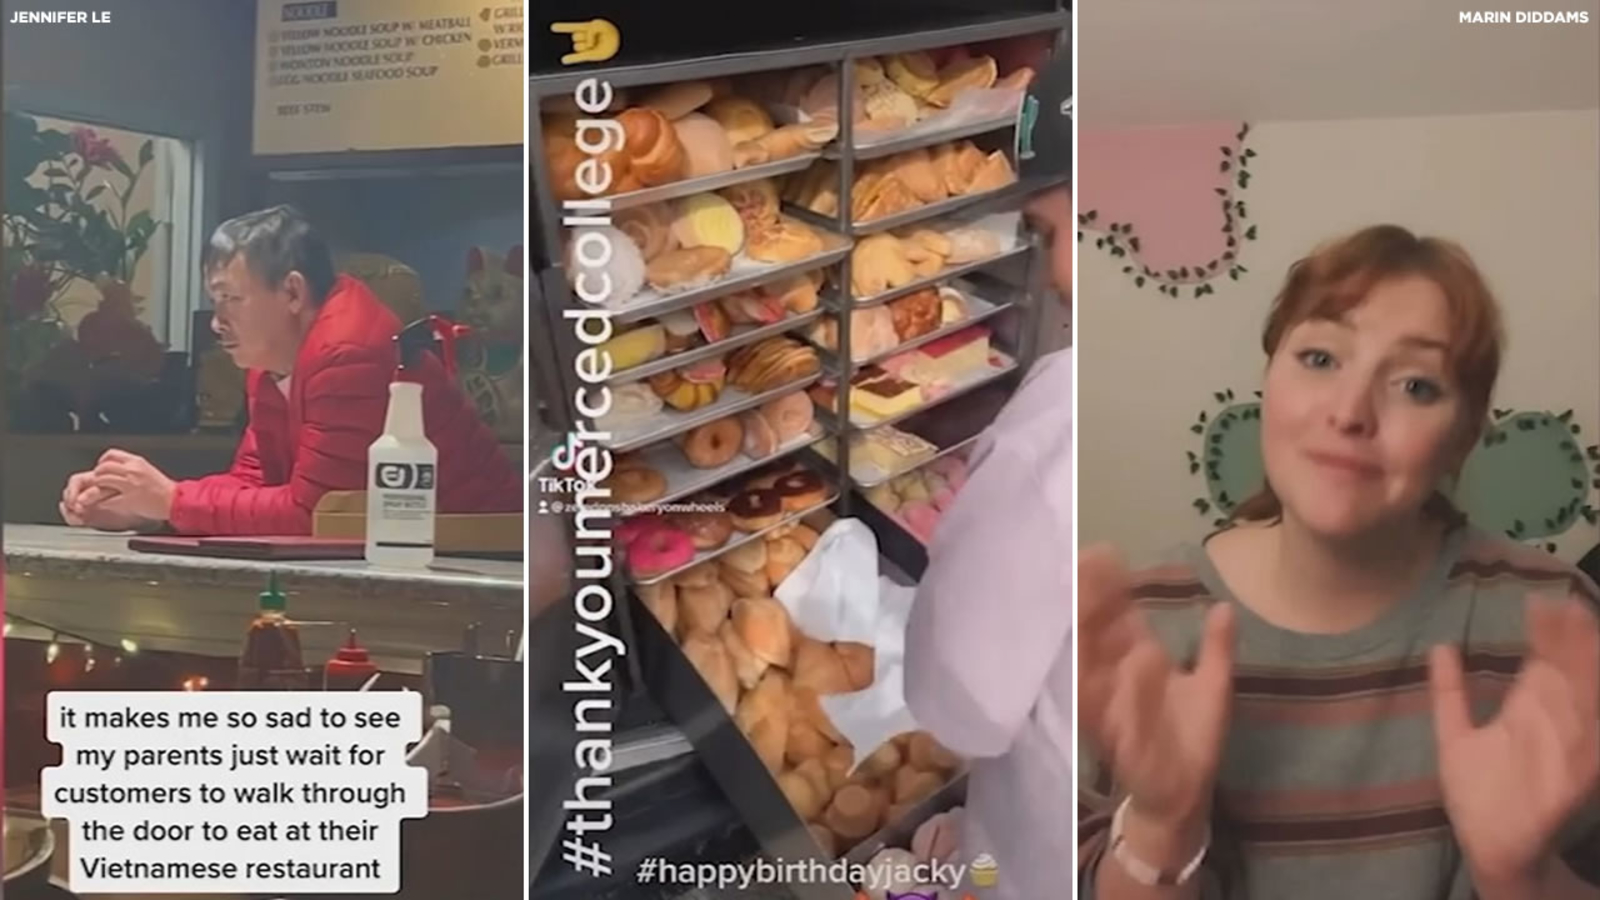 Bay Area business owner says a TikTok ban would negatively impact thousands of small businesses across the US [Video]